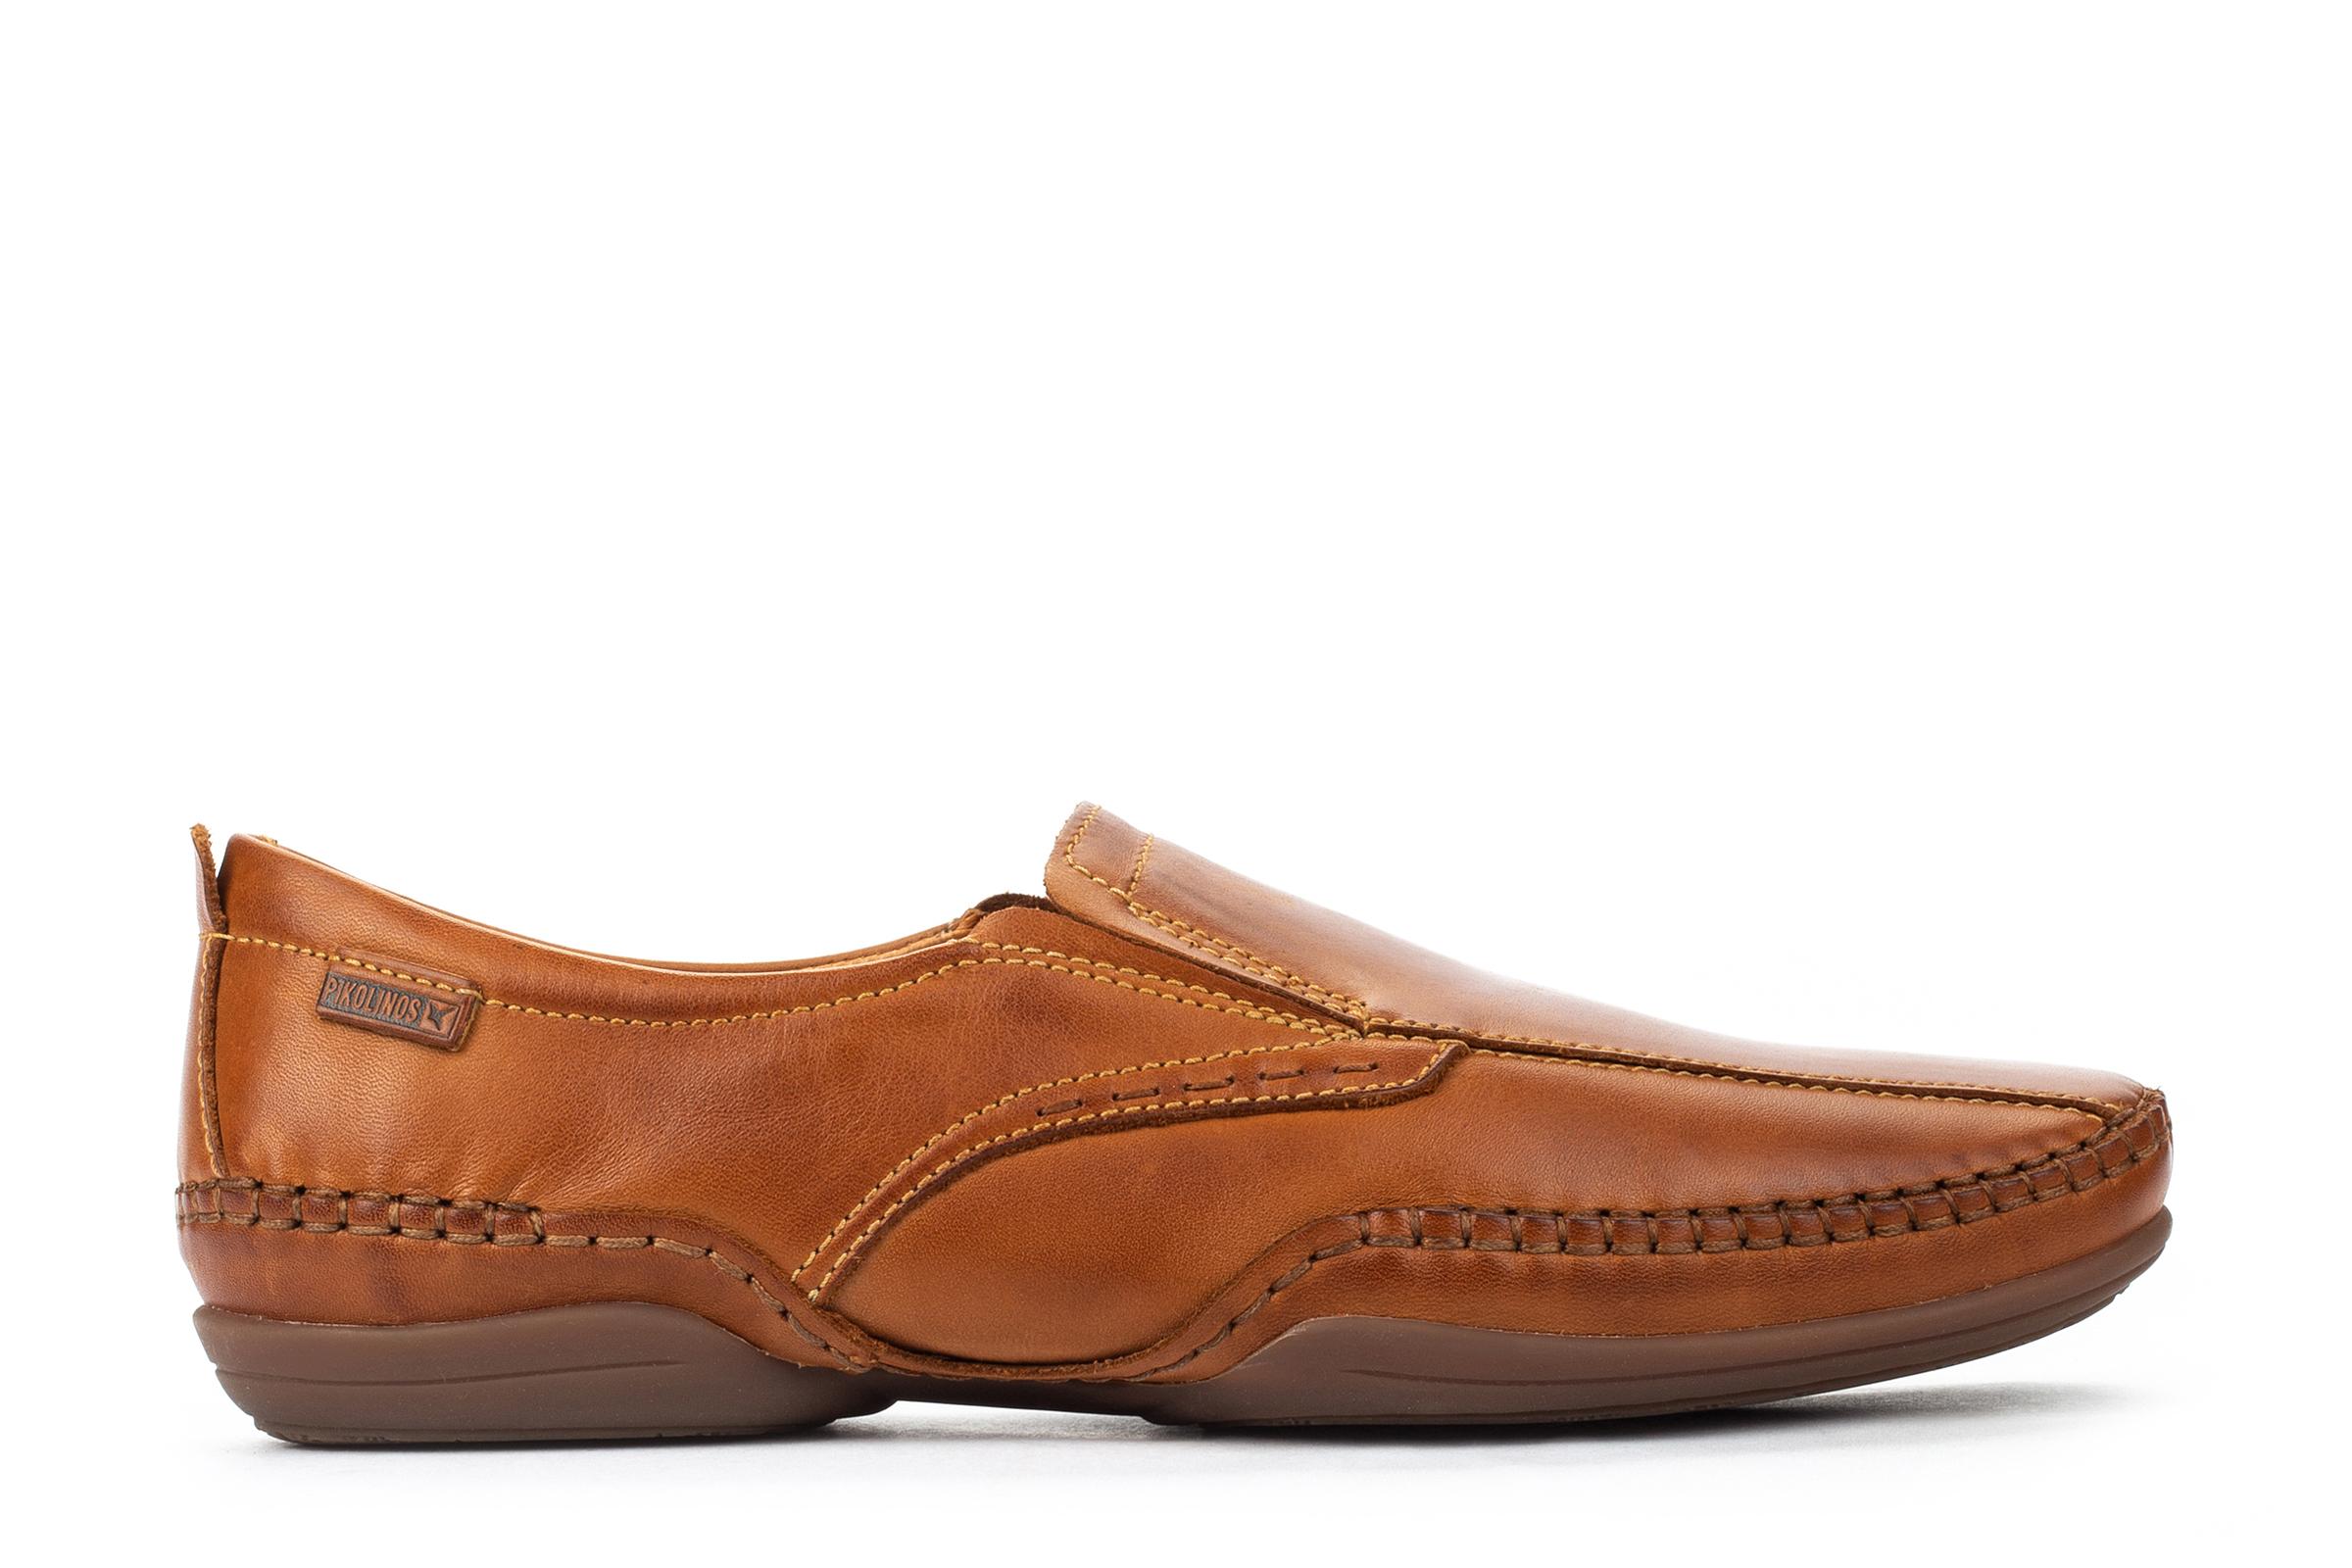 Pikolinos Loafer Puerto Rico in Brown for Men - Save 3% - Lyst